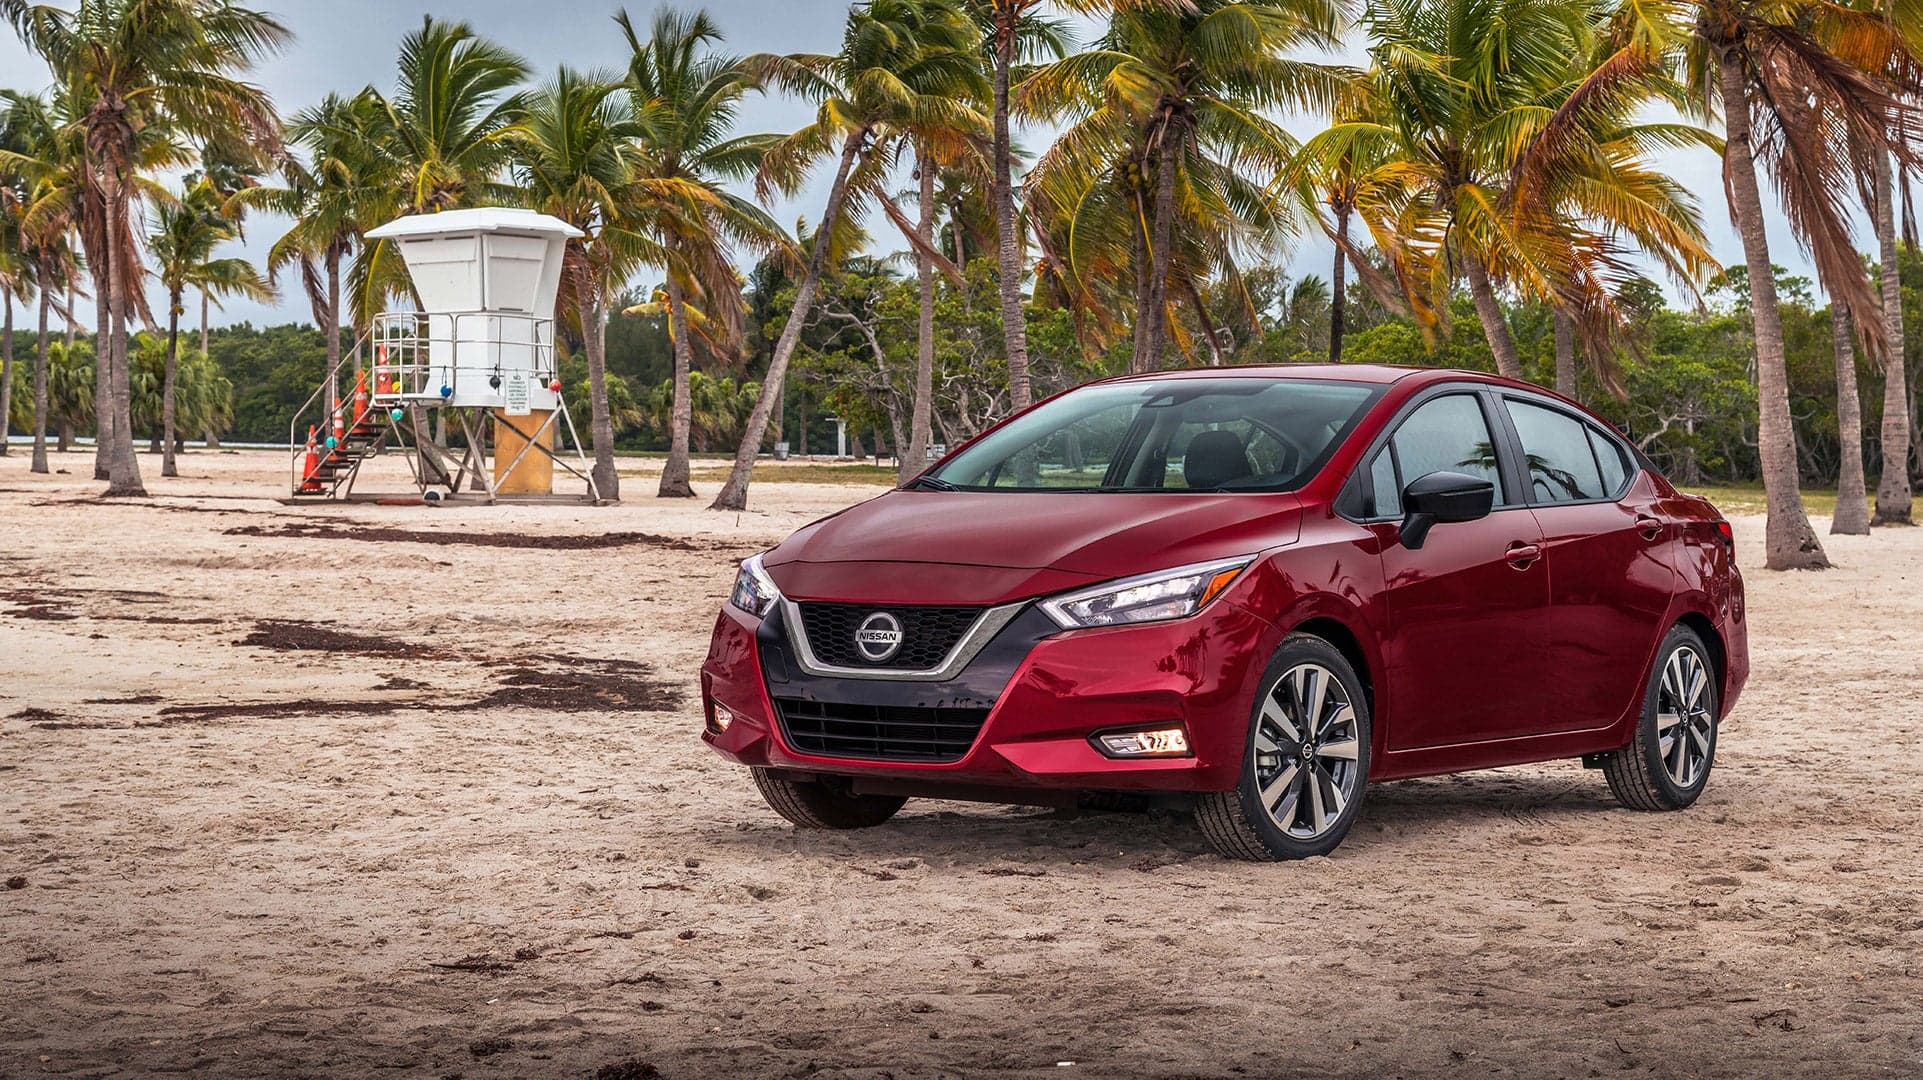 2020 Nissan Versa Sedan: Modern Looks and Advanced Safety Tech Bundled in a Tiny Package